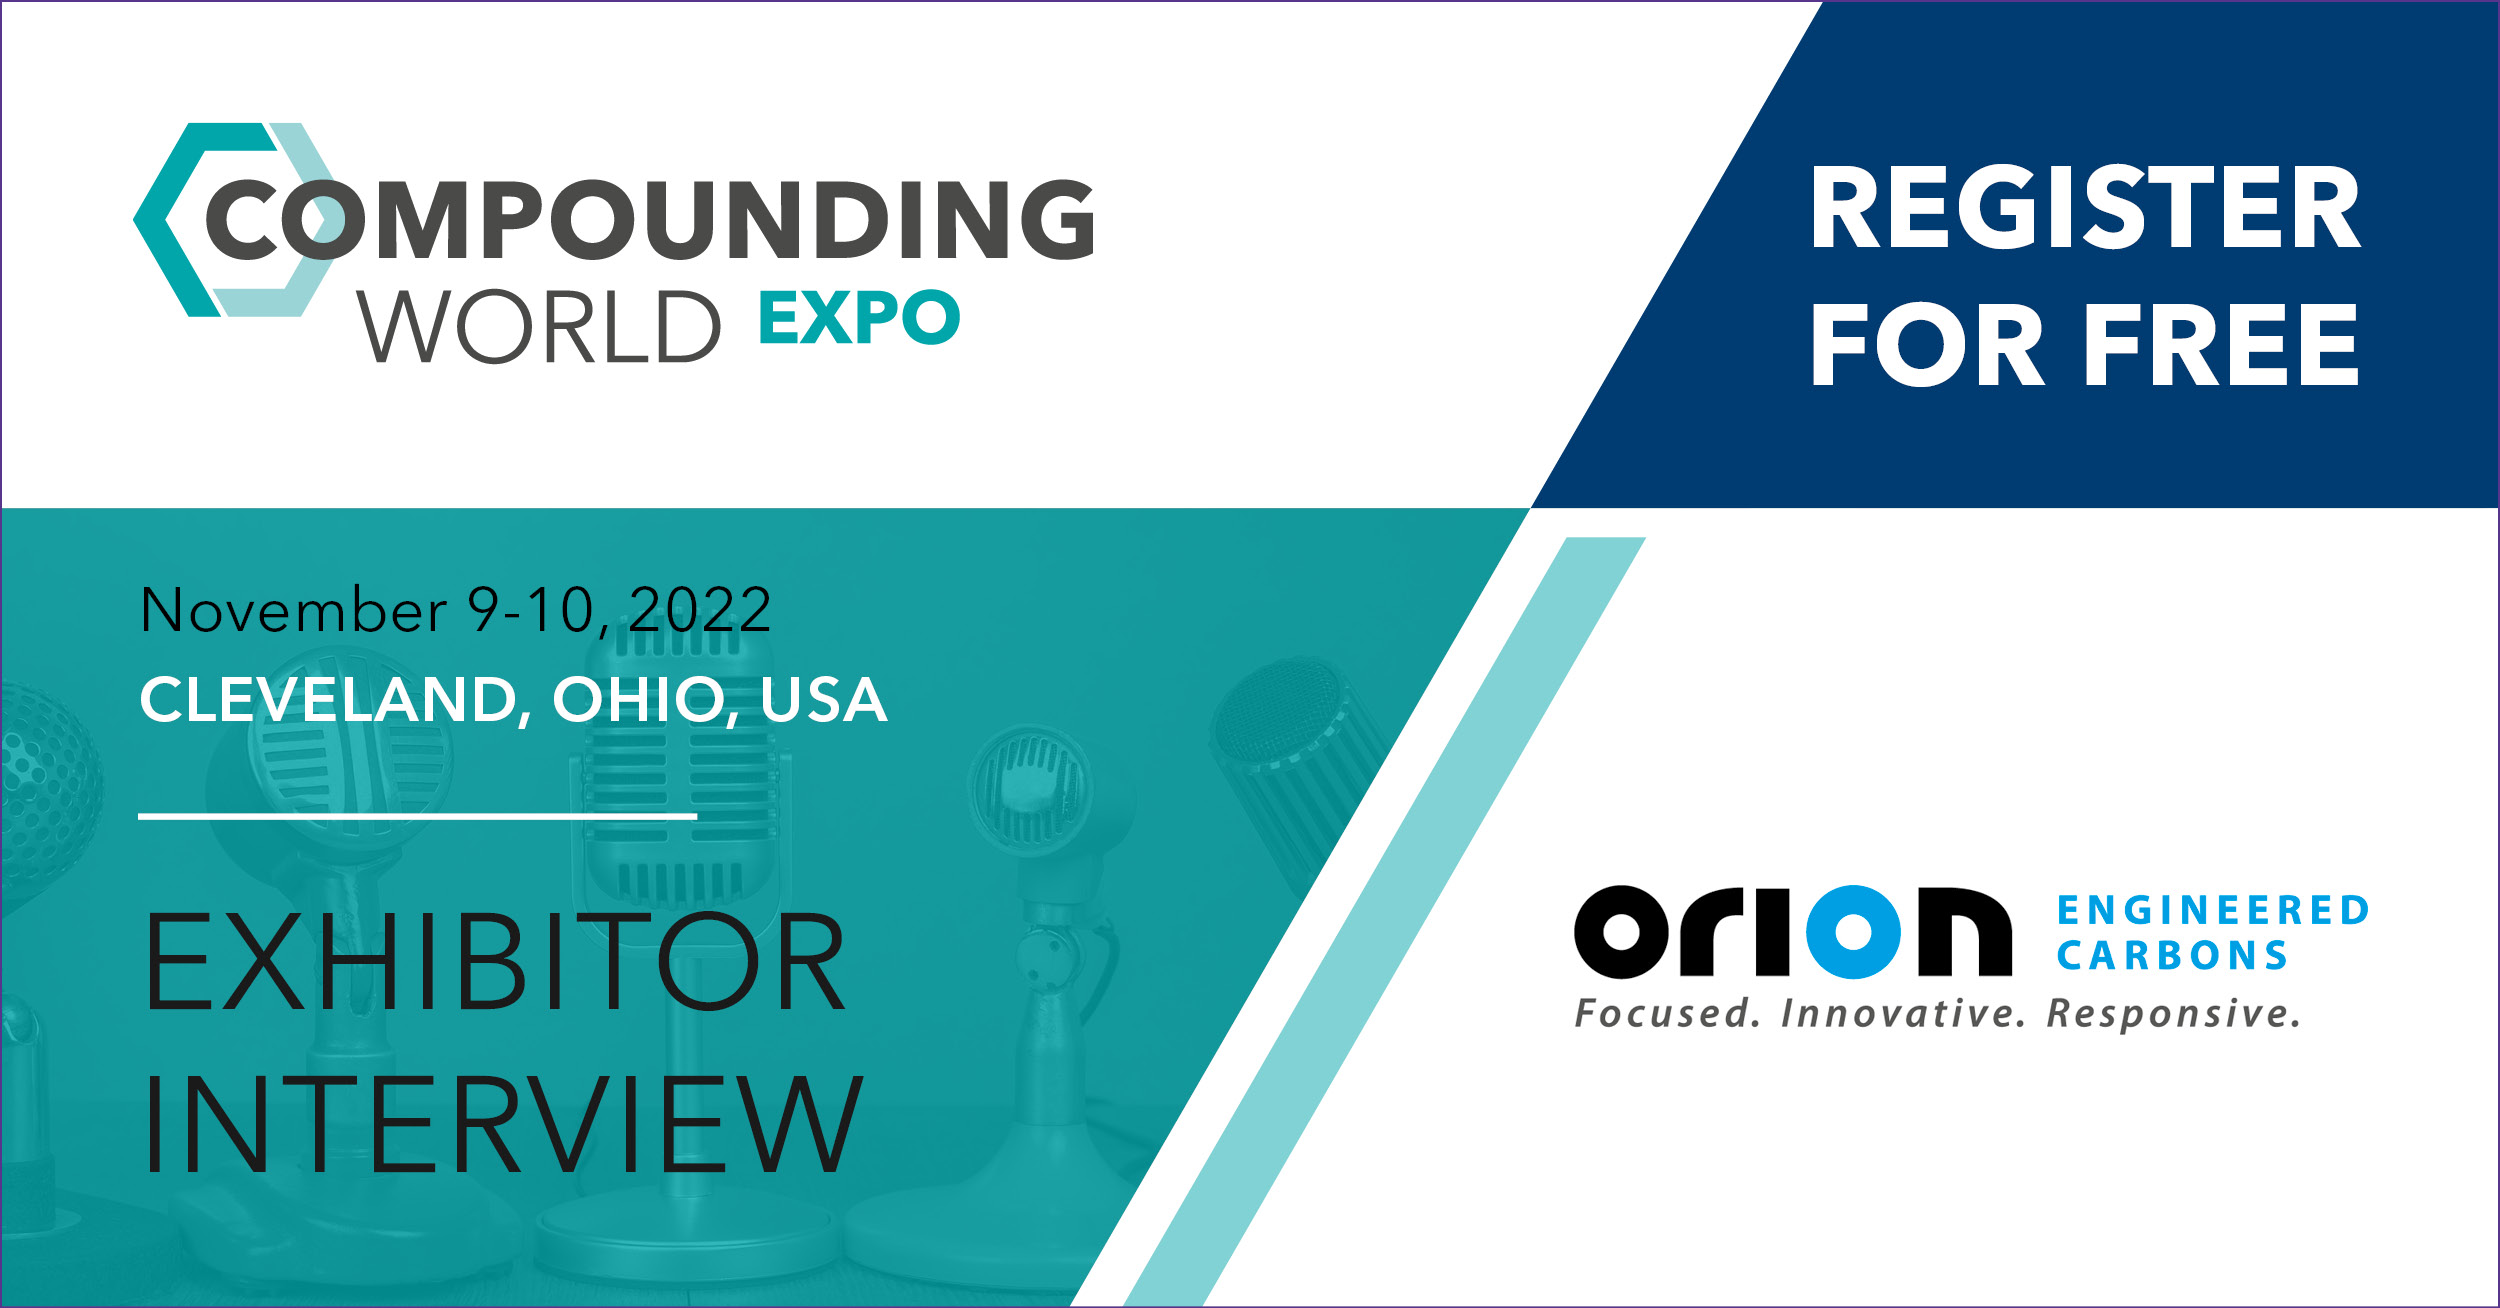 Compounding World Expo: Orion Engineered Carbons